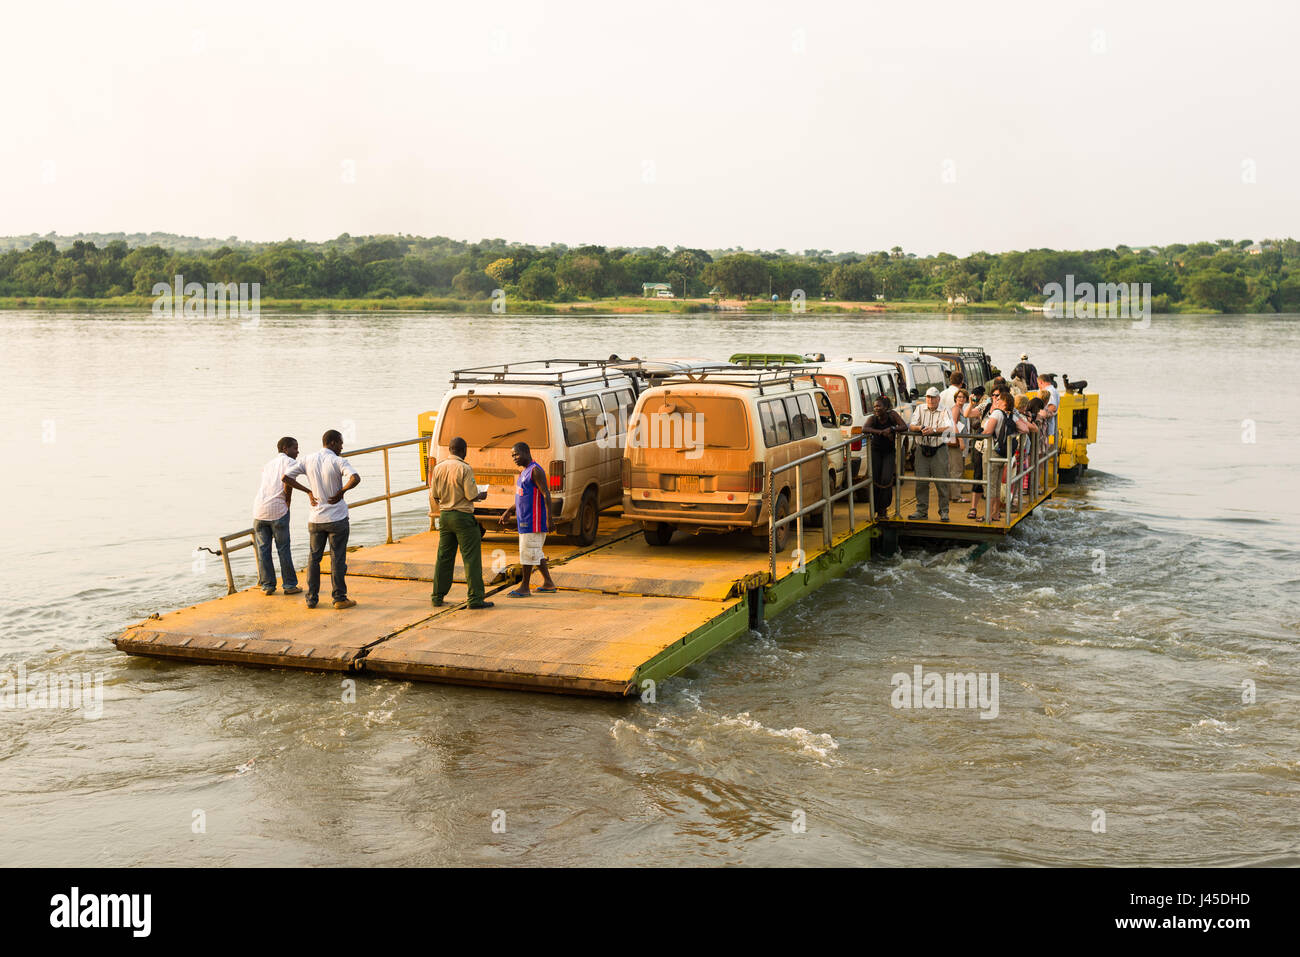 A small vehicle ferry transporting vehicles and people across the Victoria Nile river at Paraa in Murchison Falls National Park, Uganda Stock Photo